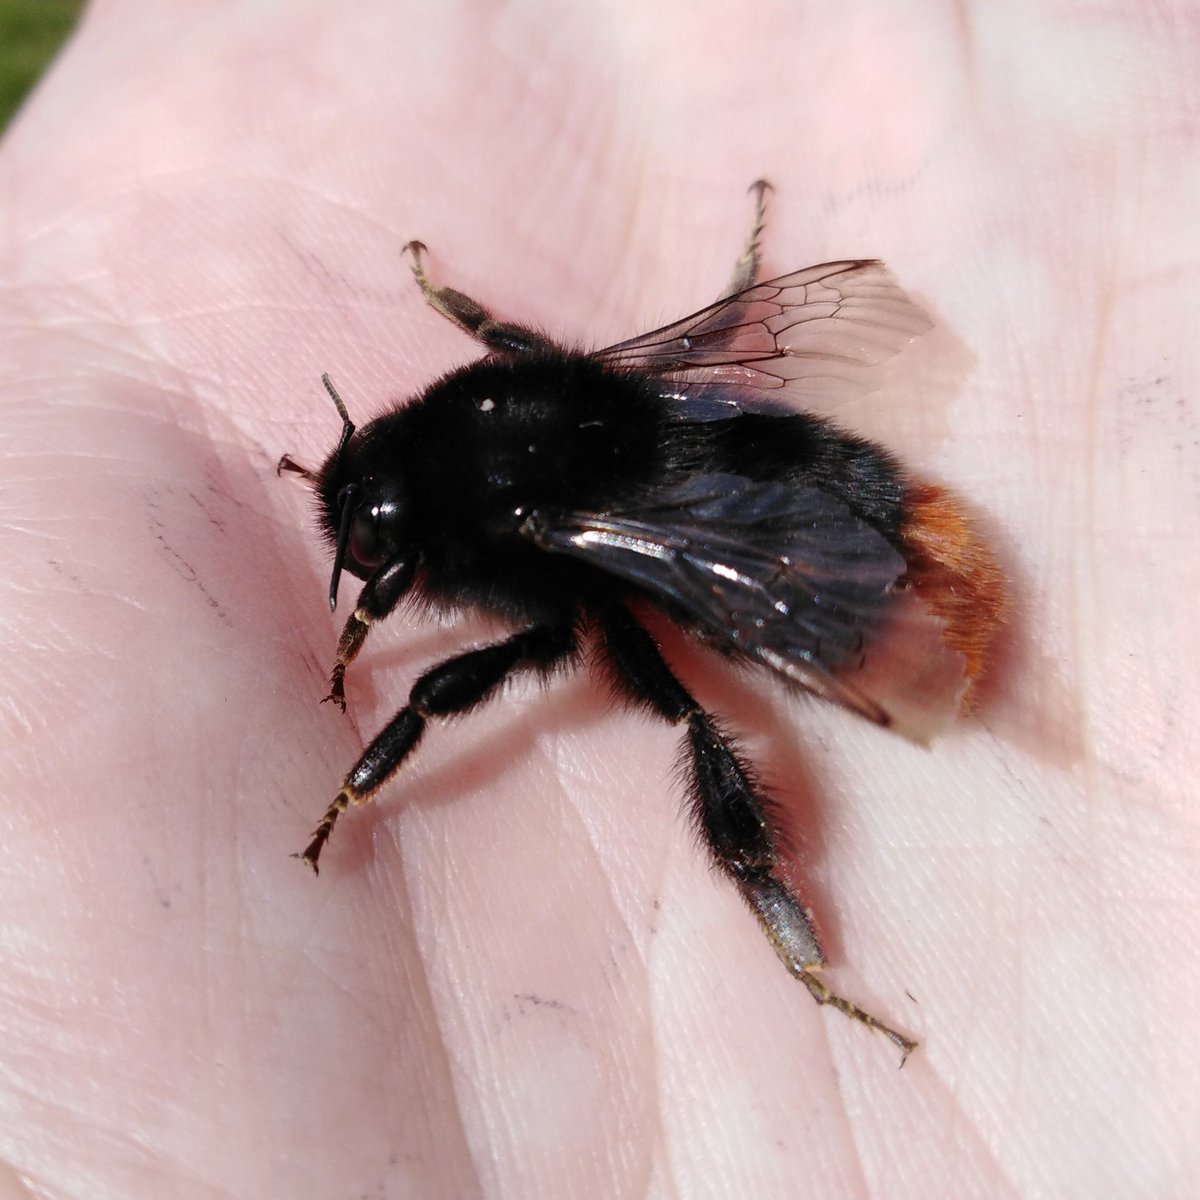 Beautiful Red-Tailed Bumblebee queen netted in Manse garden today. She stayed in my hand long enough for a photo before heading off to look for a nest site. #redtailedbumblebee  #bumblebee  #bee  #bees  #cutebee  #lovebees @BumblebeeTrust  @DaveGoulson